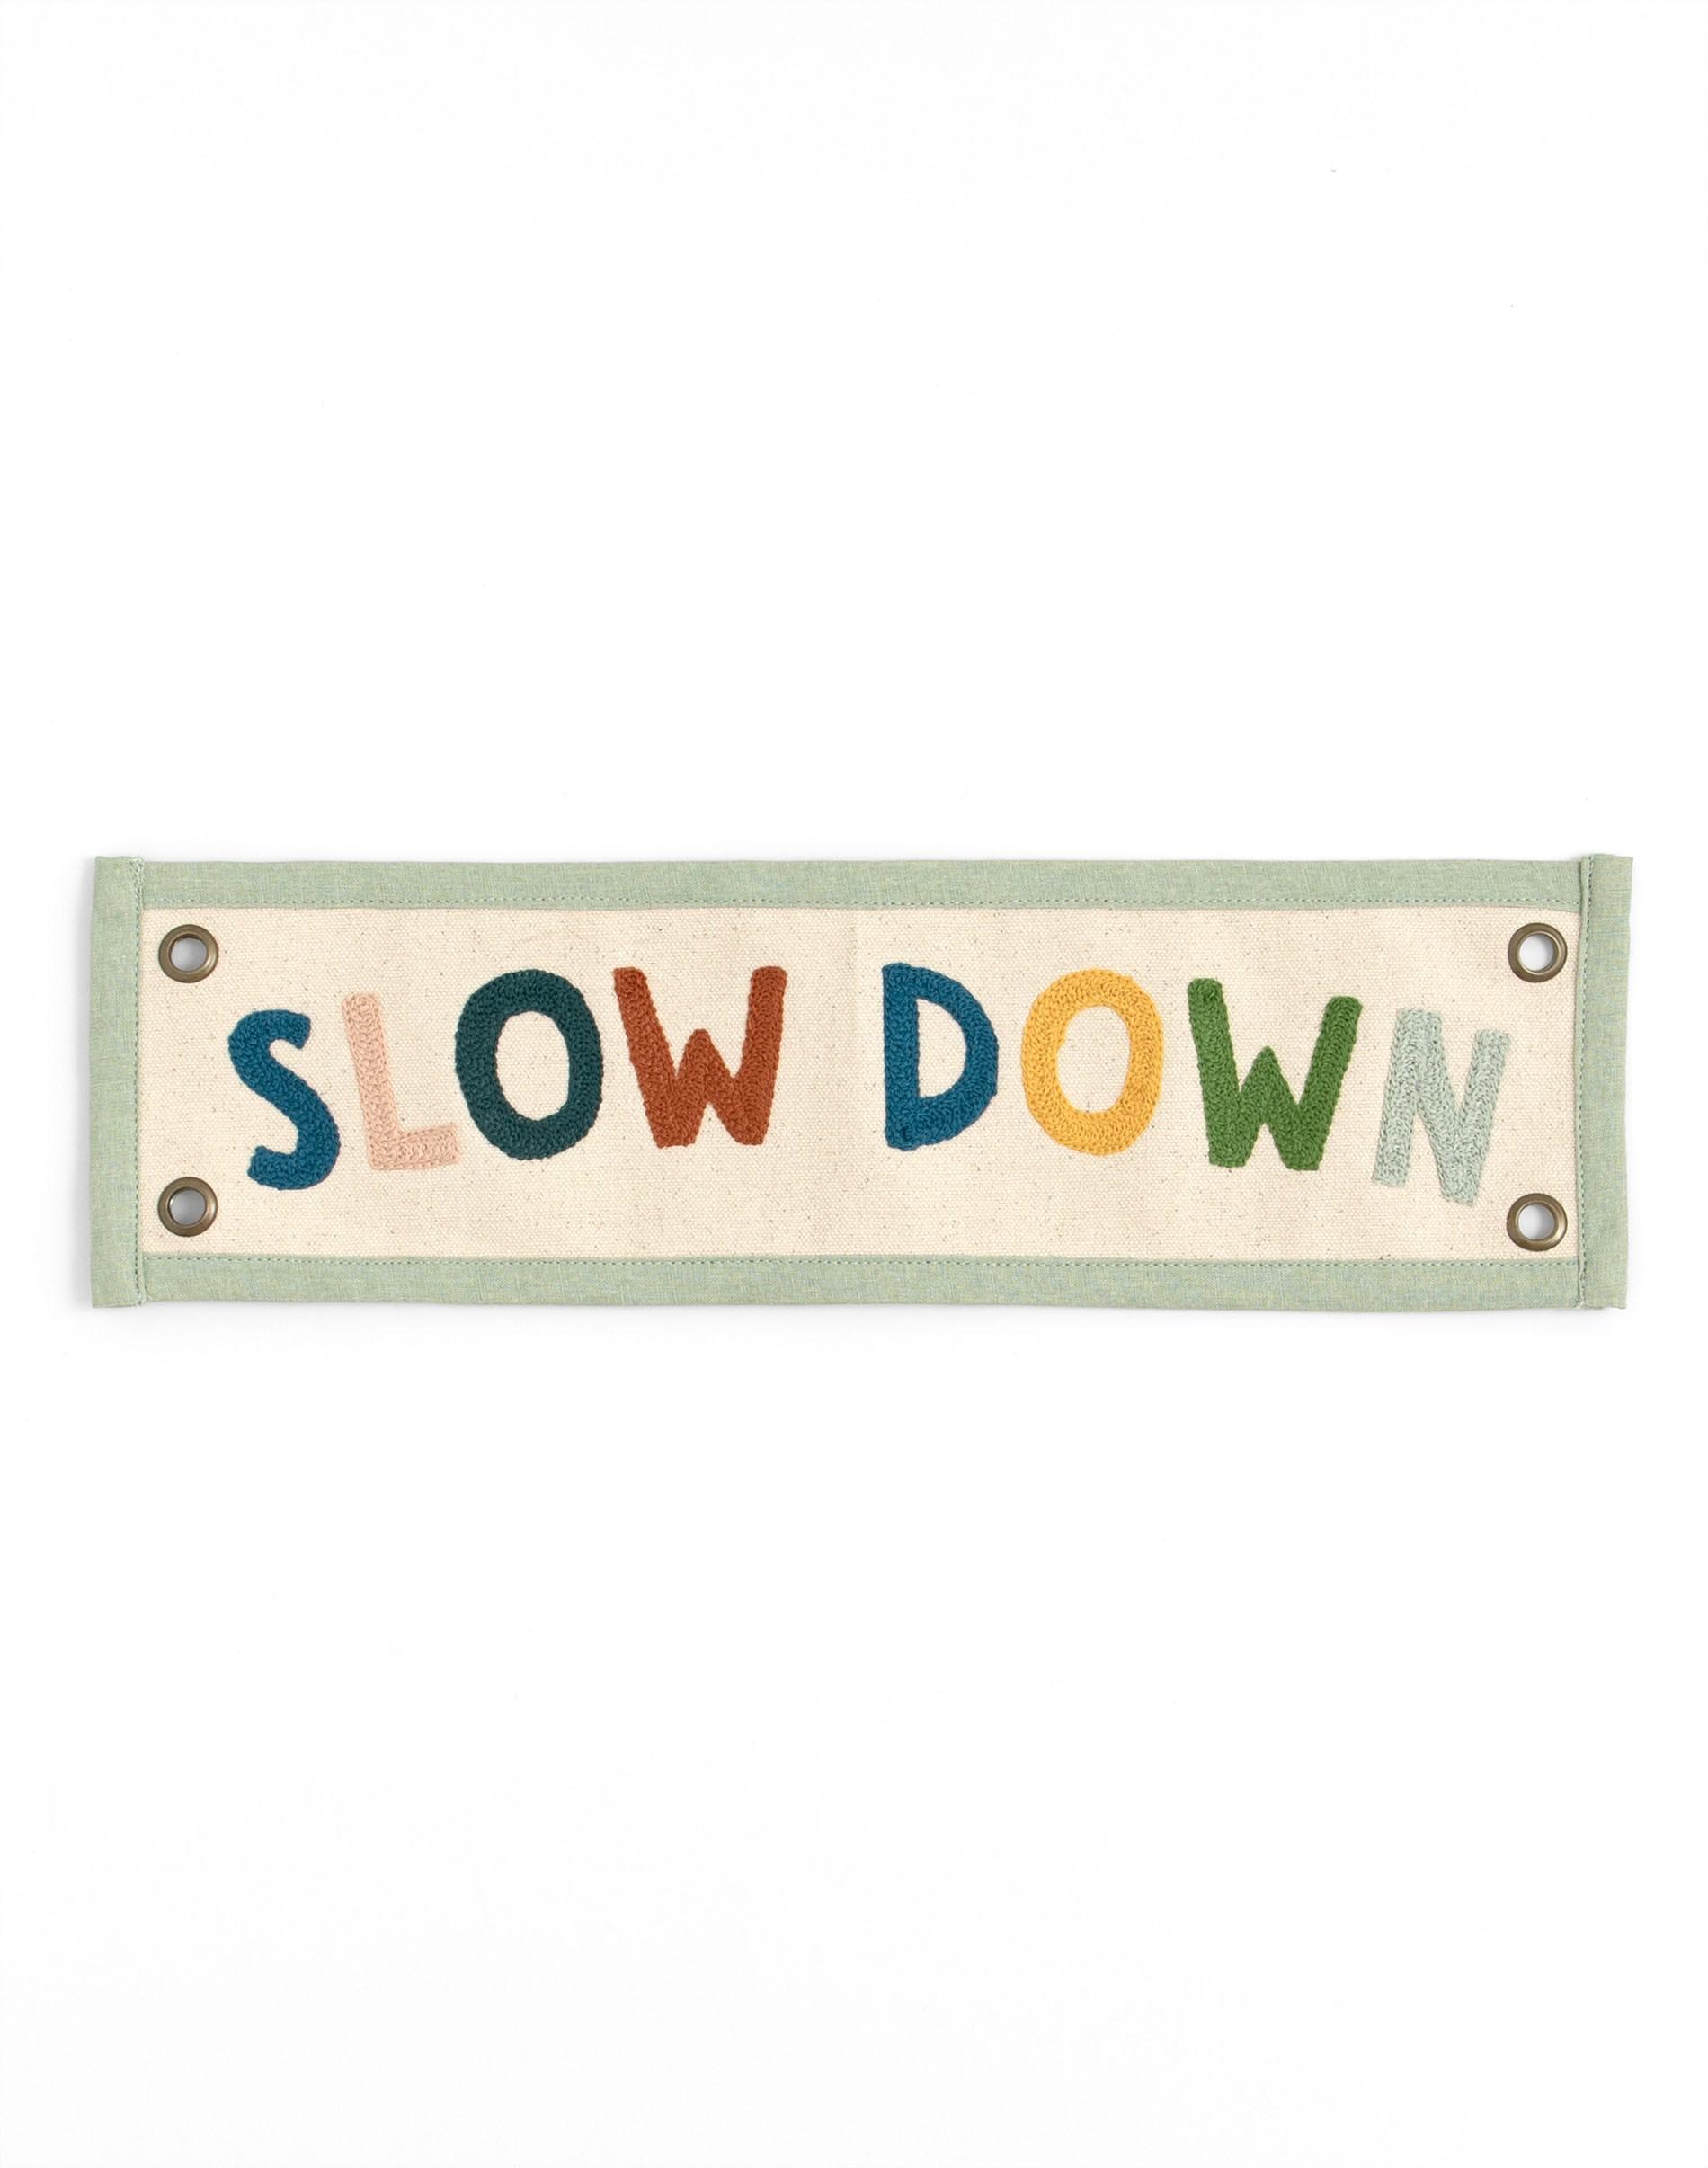 Slow Down Embroidered Canvas Banner - 1canoe2